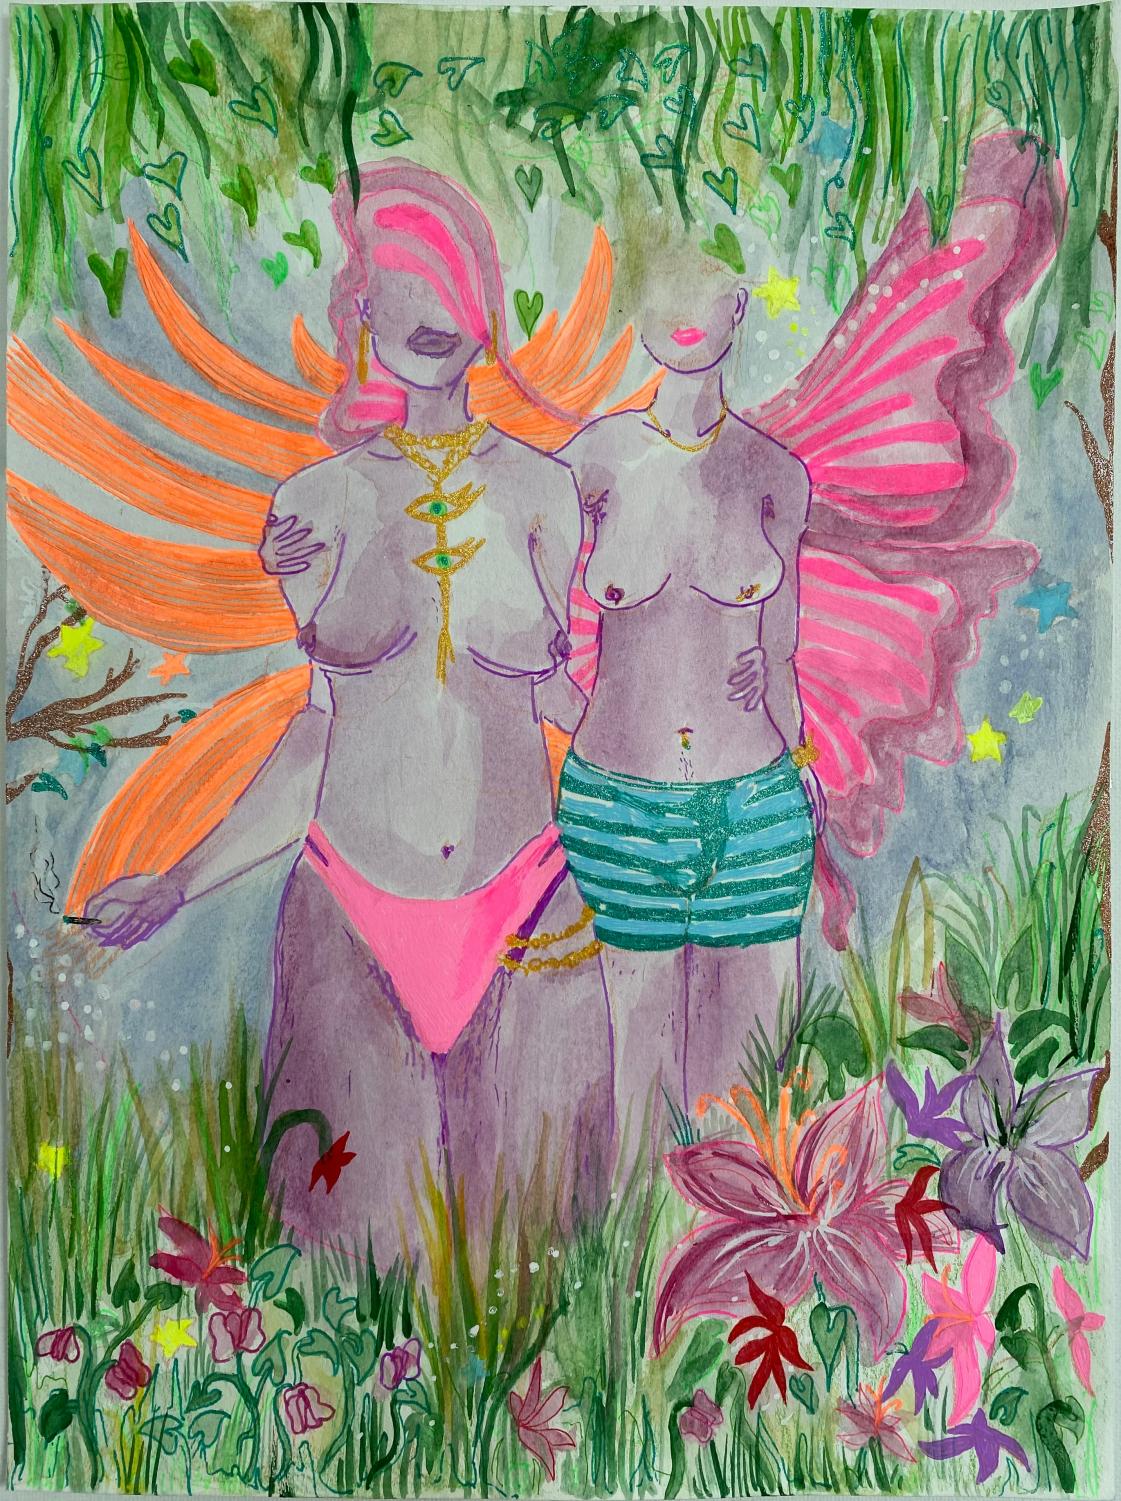 Two+topless+winged+figures+face+forward.+They+are+surrounded+by+flowers.